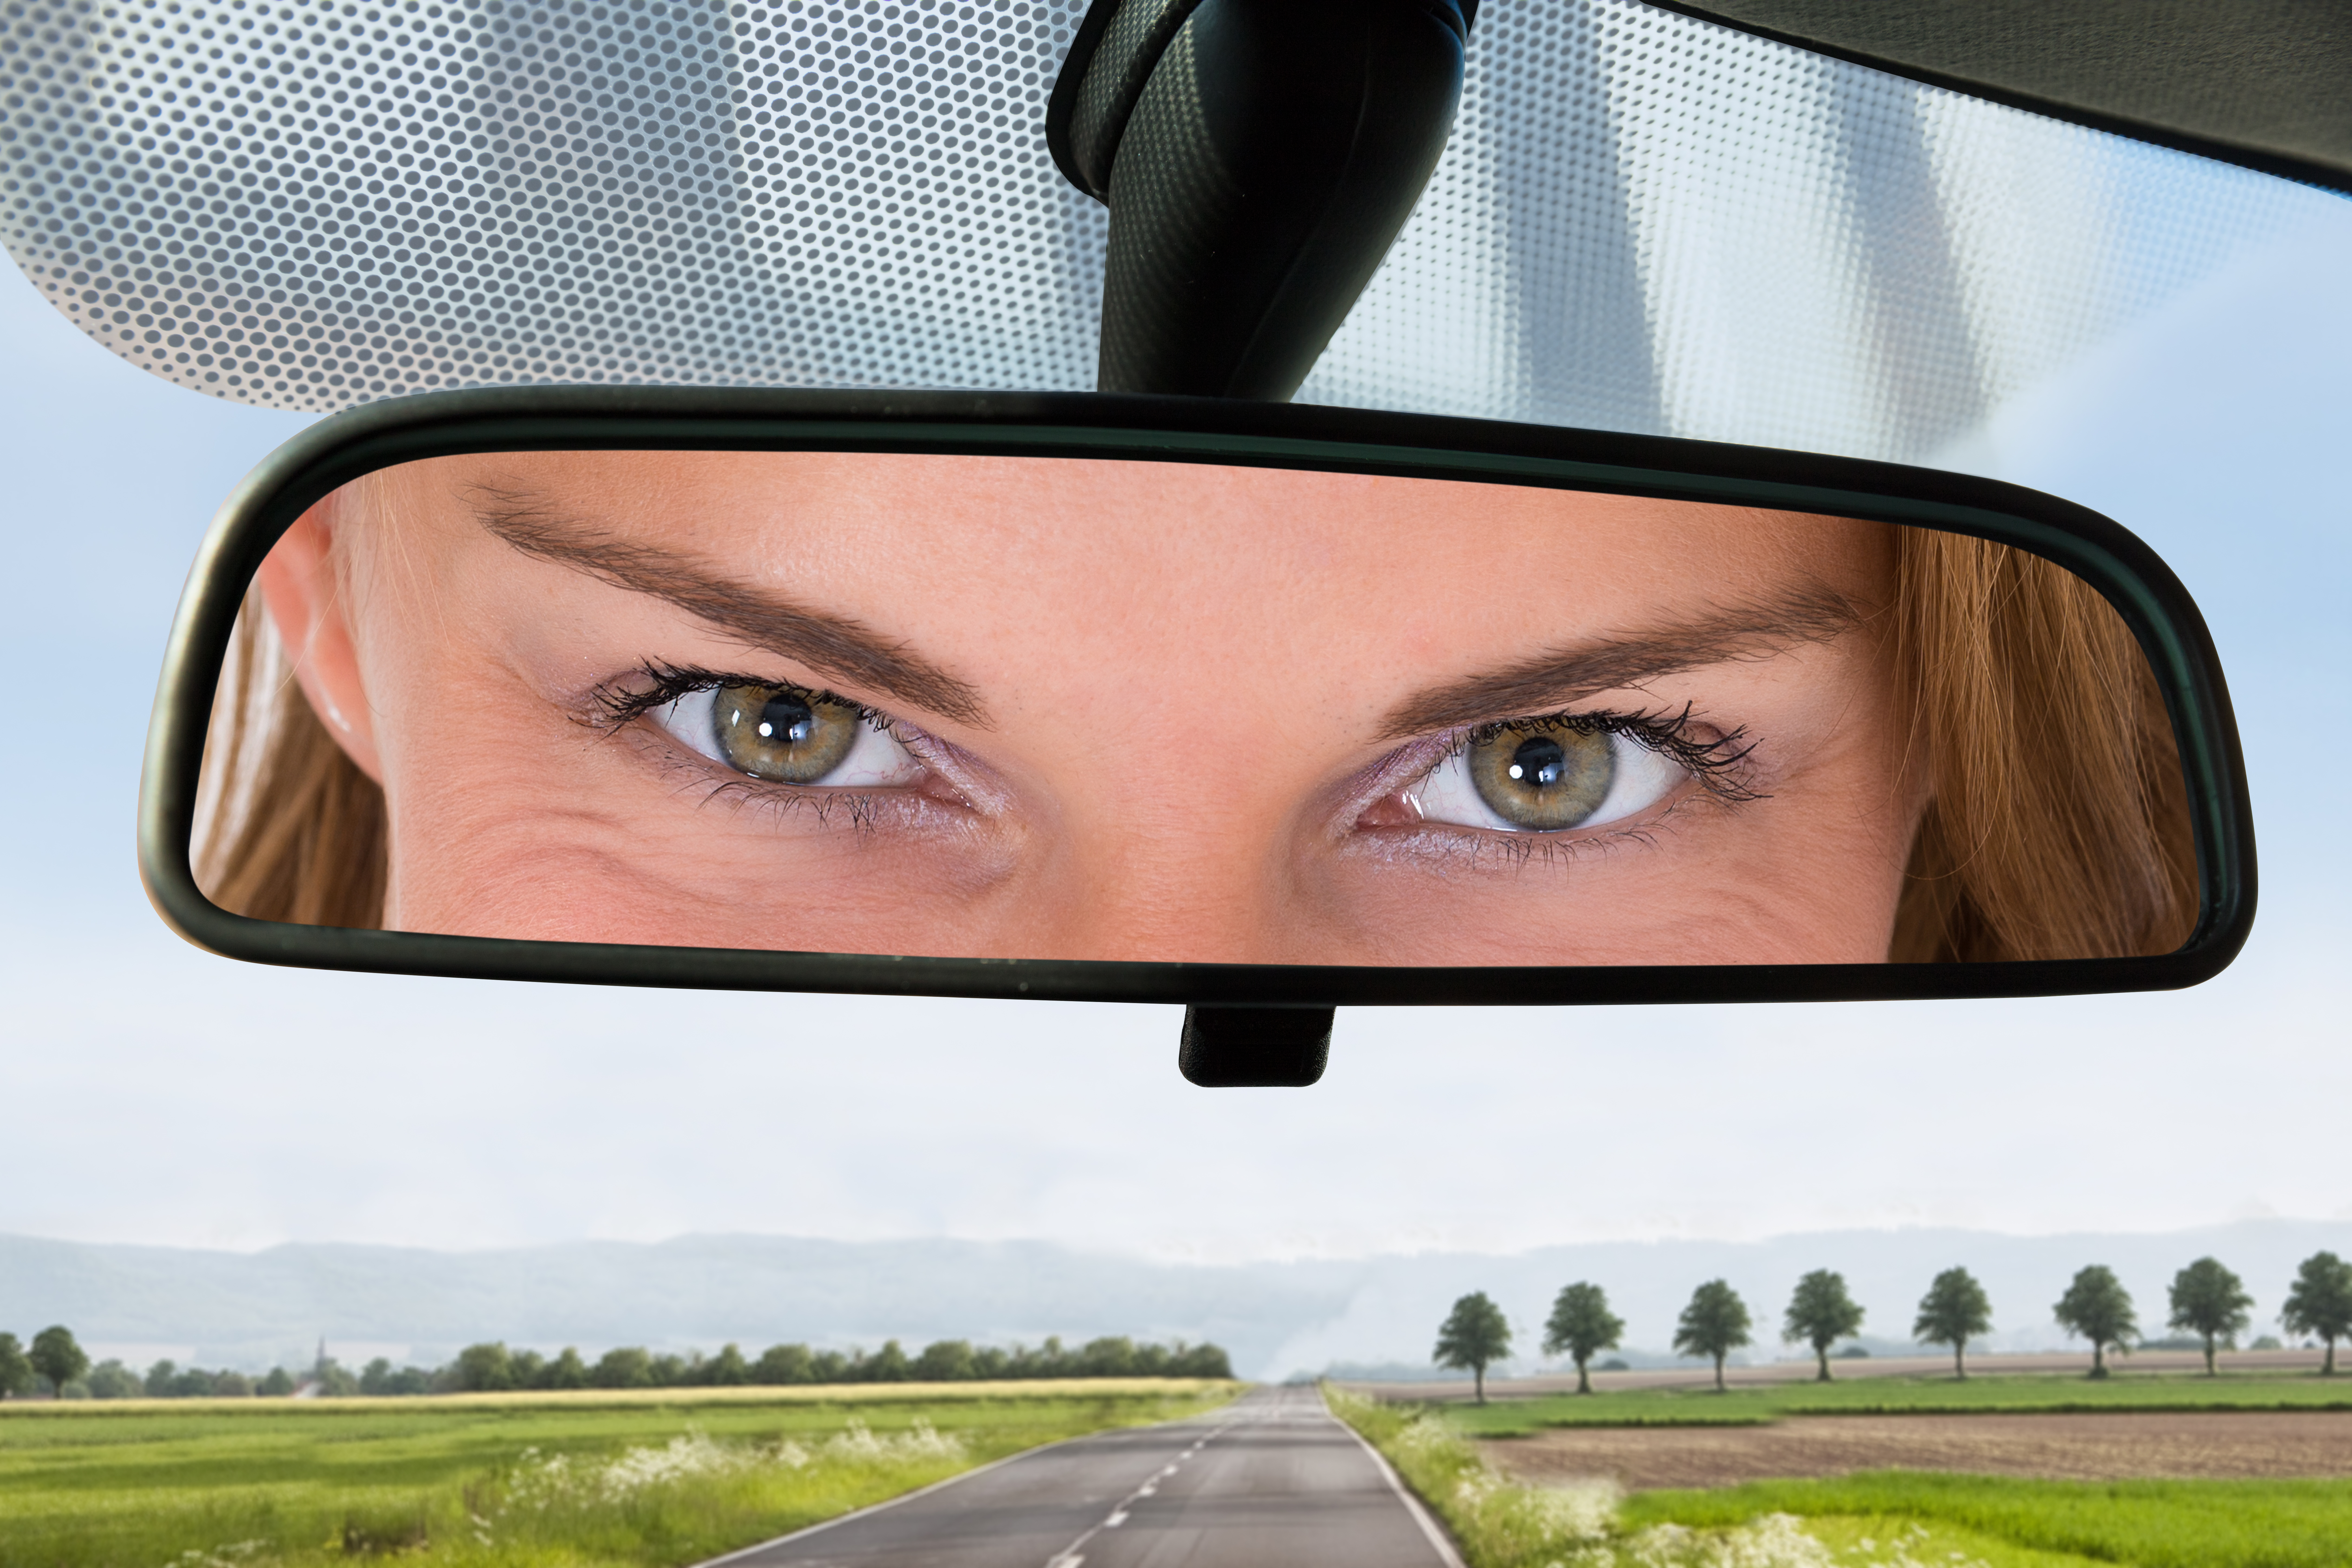  - How are you finding your blindspots?